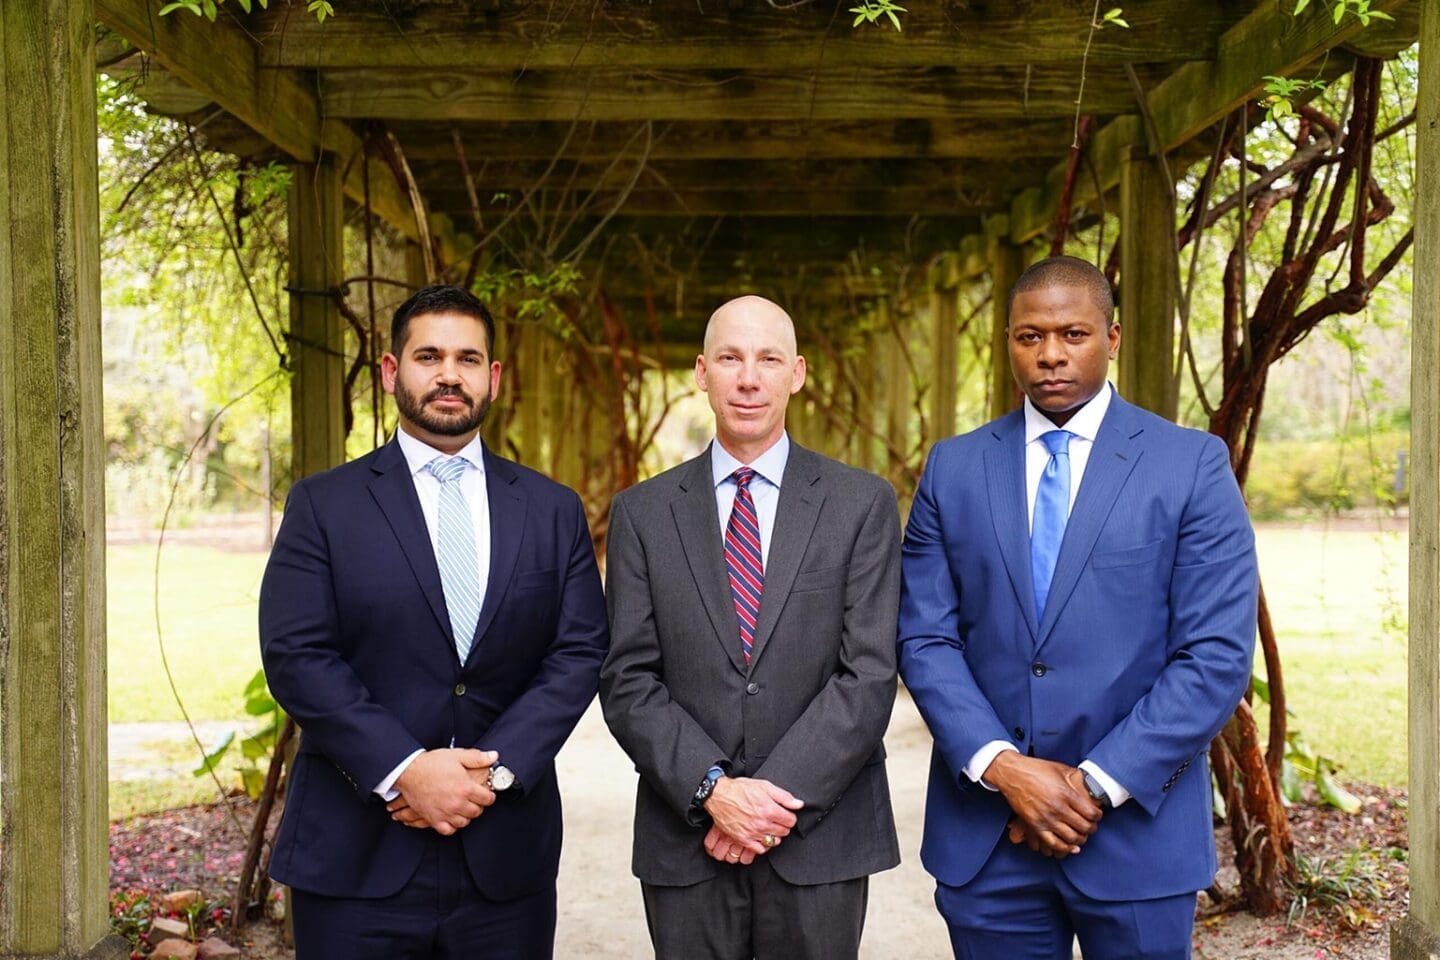 A group of attorneys working at a Charleston law firm